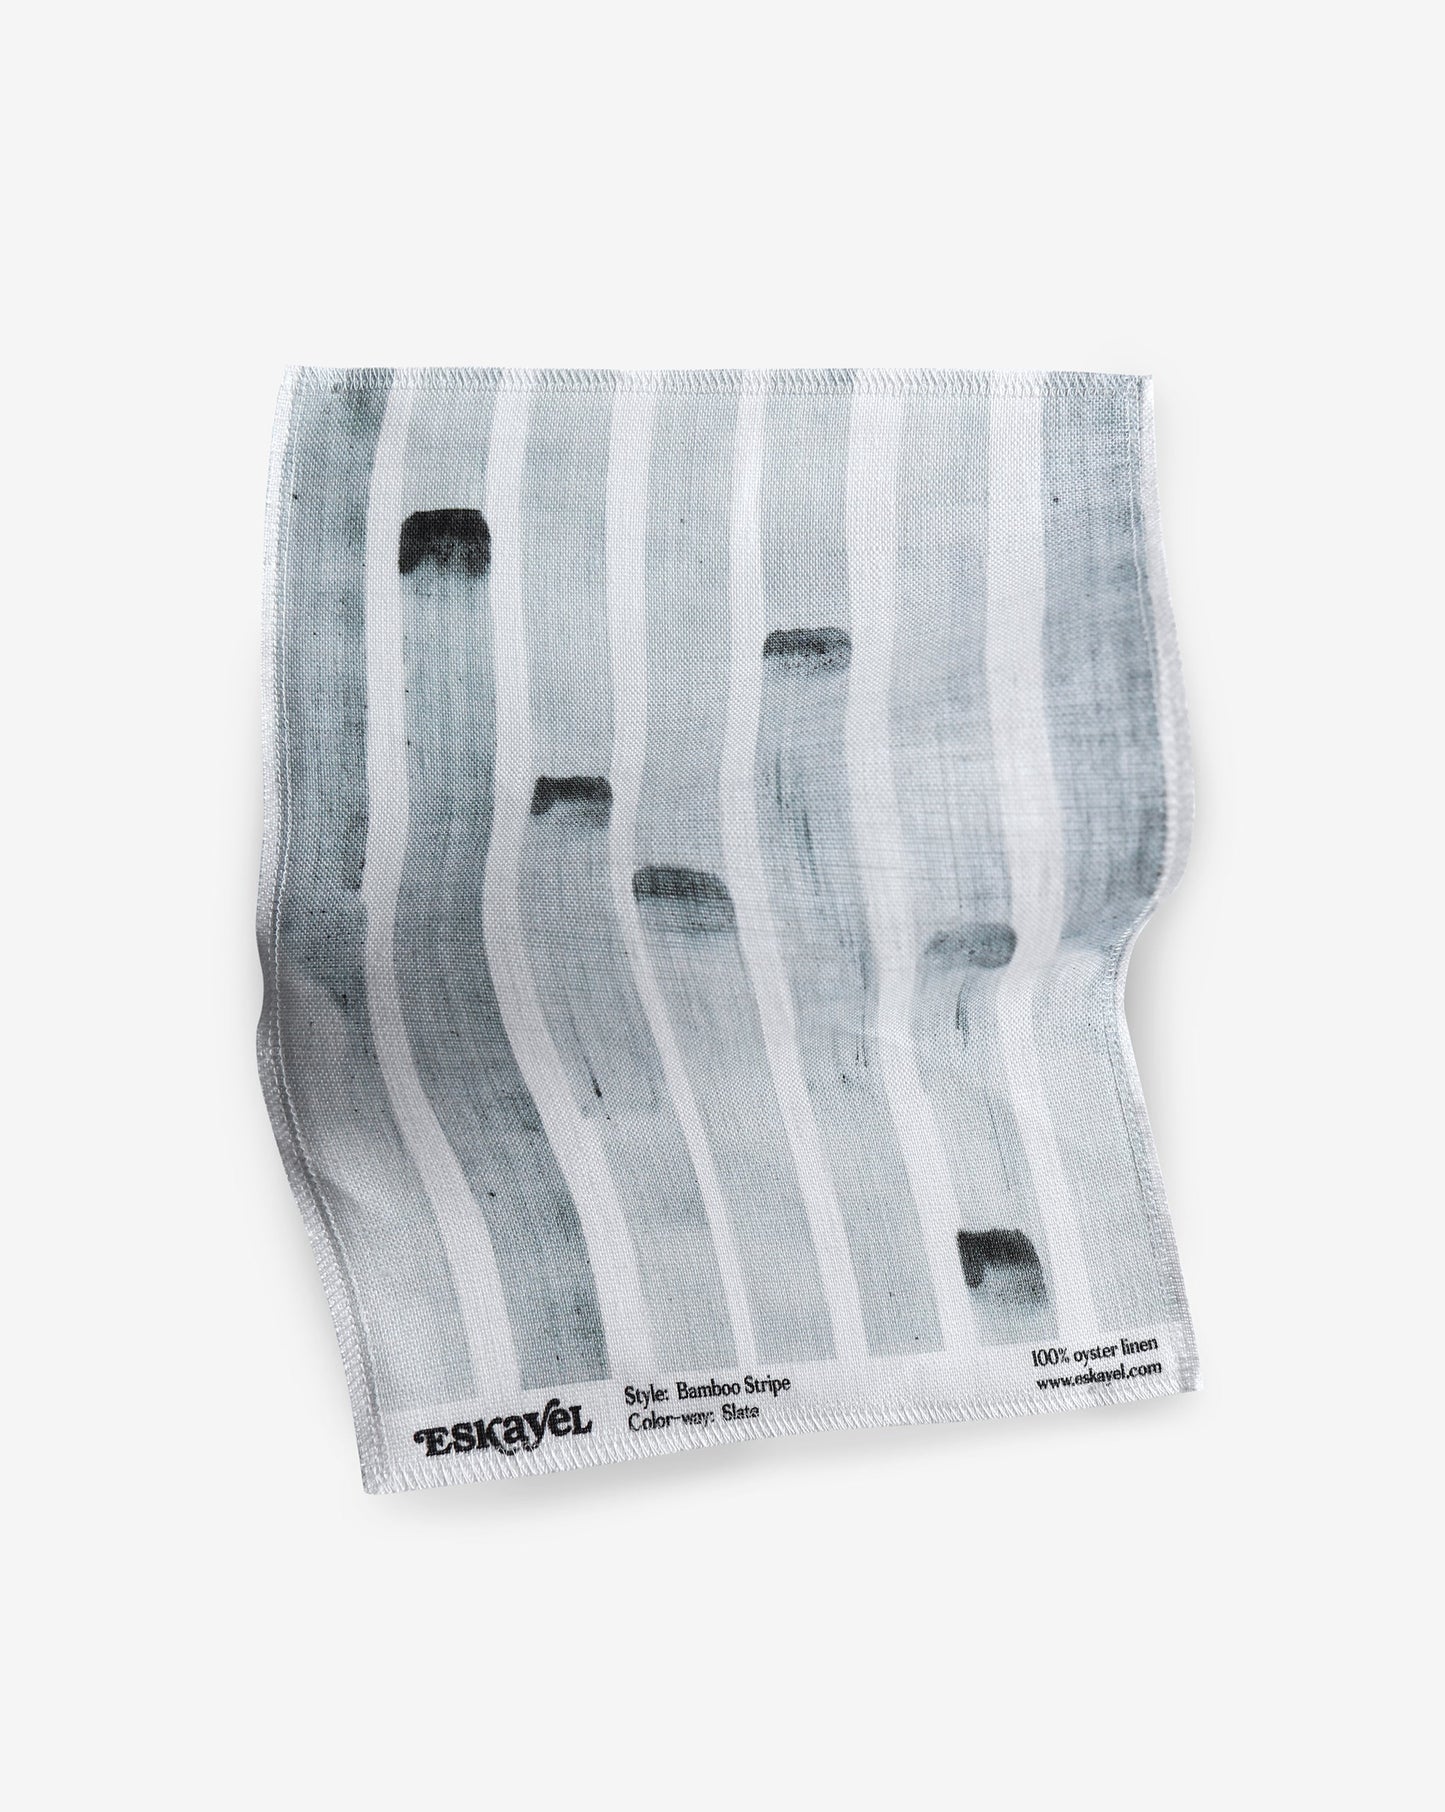 A Bamboo Stripe Fabric Slate with black and white stripes on it